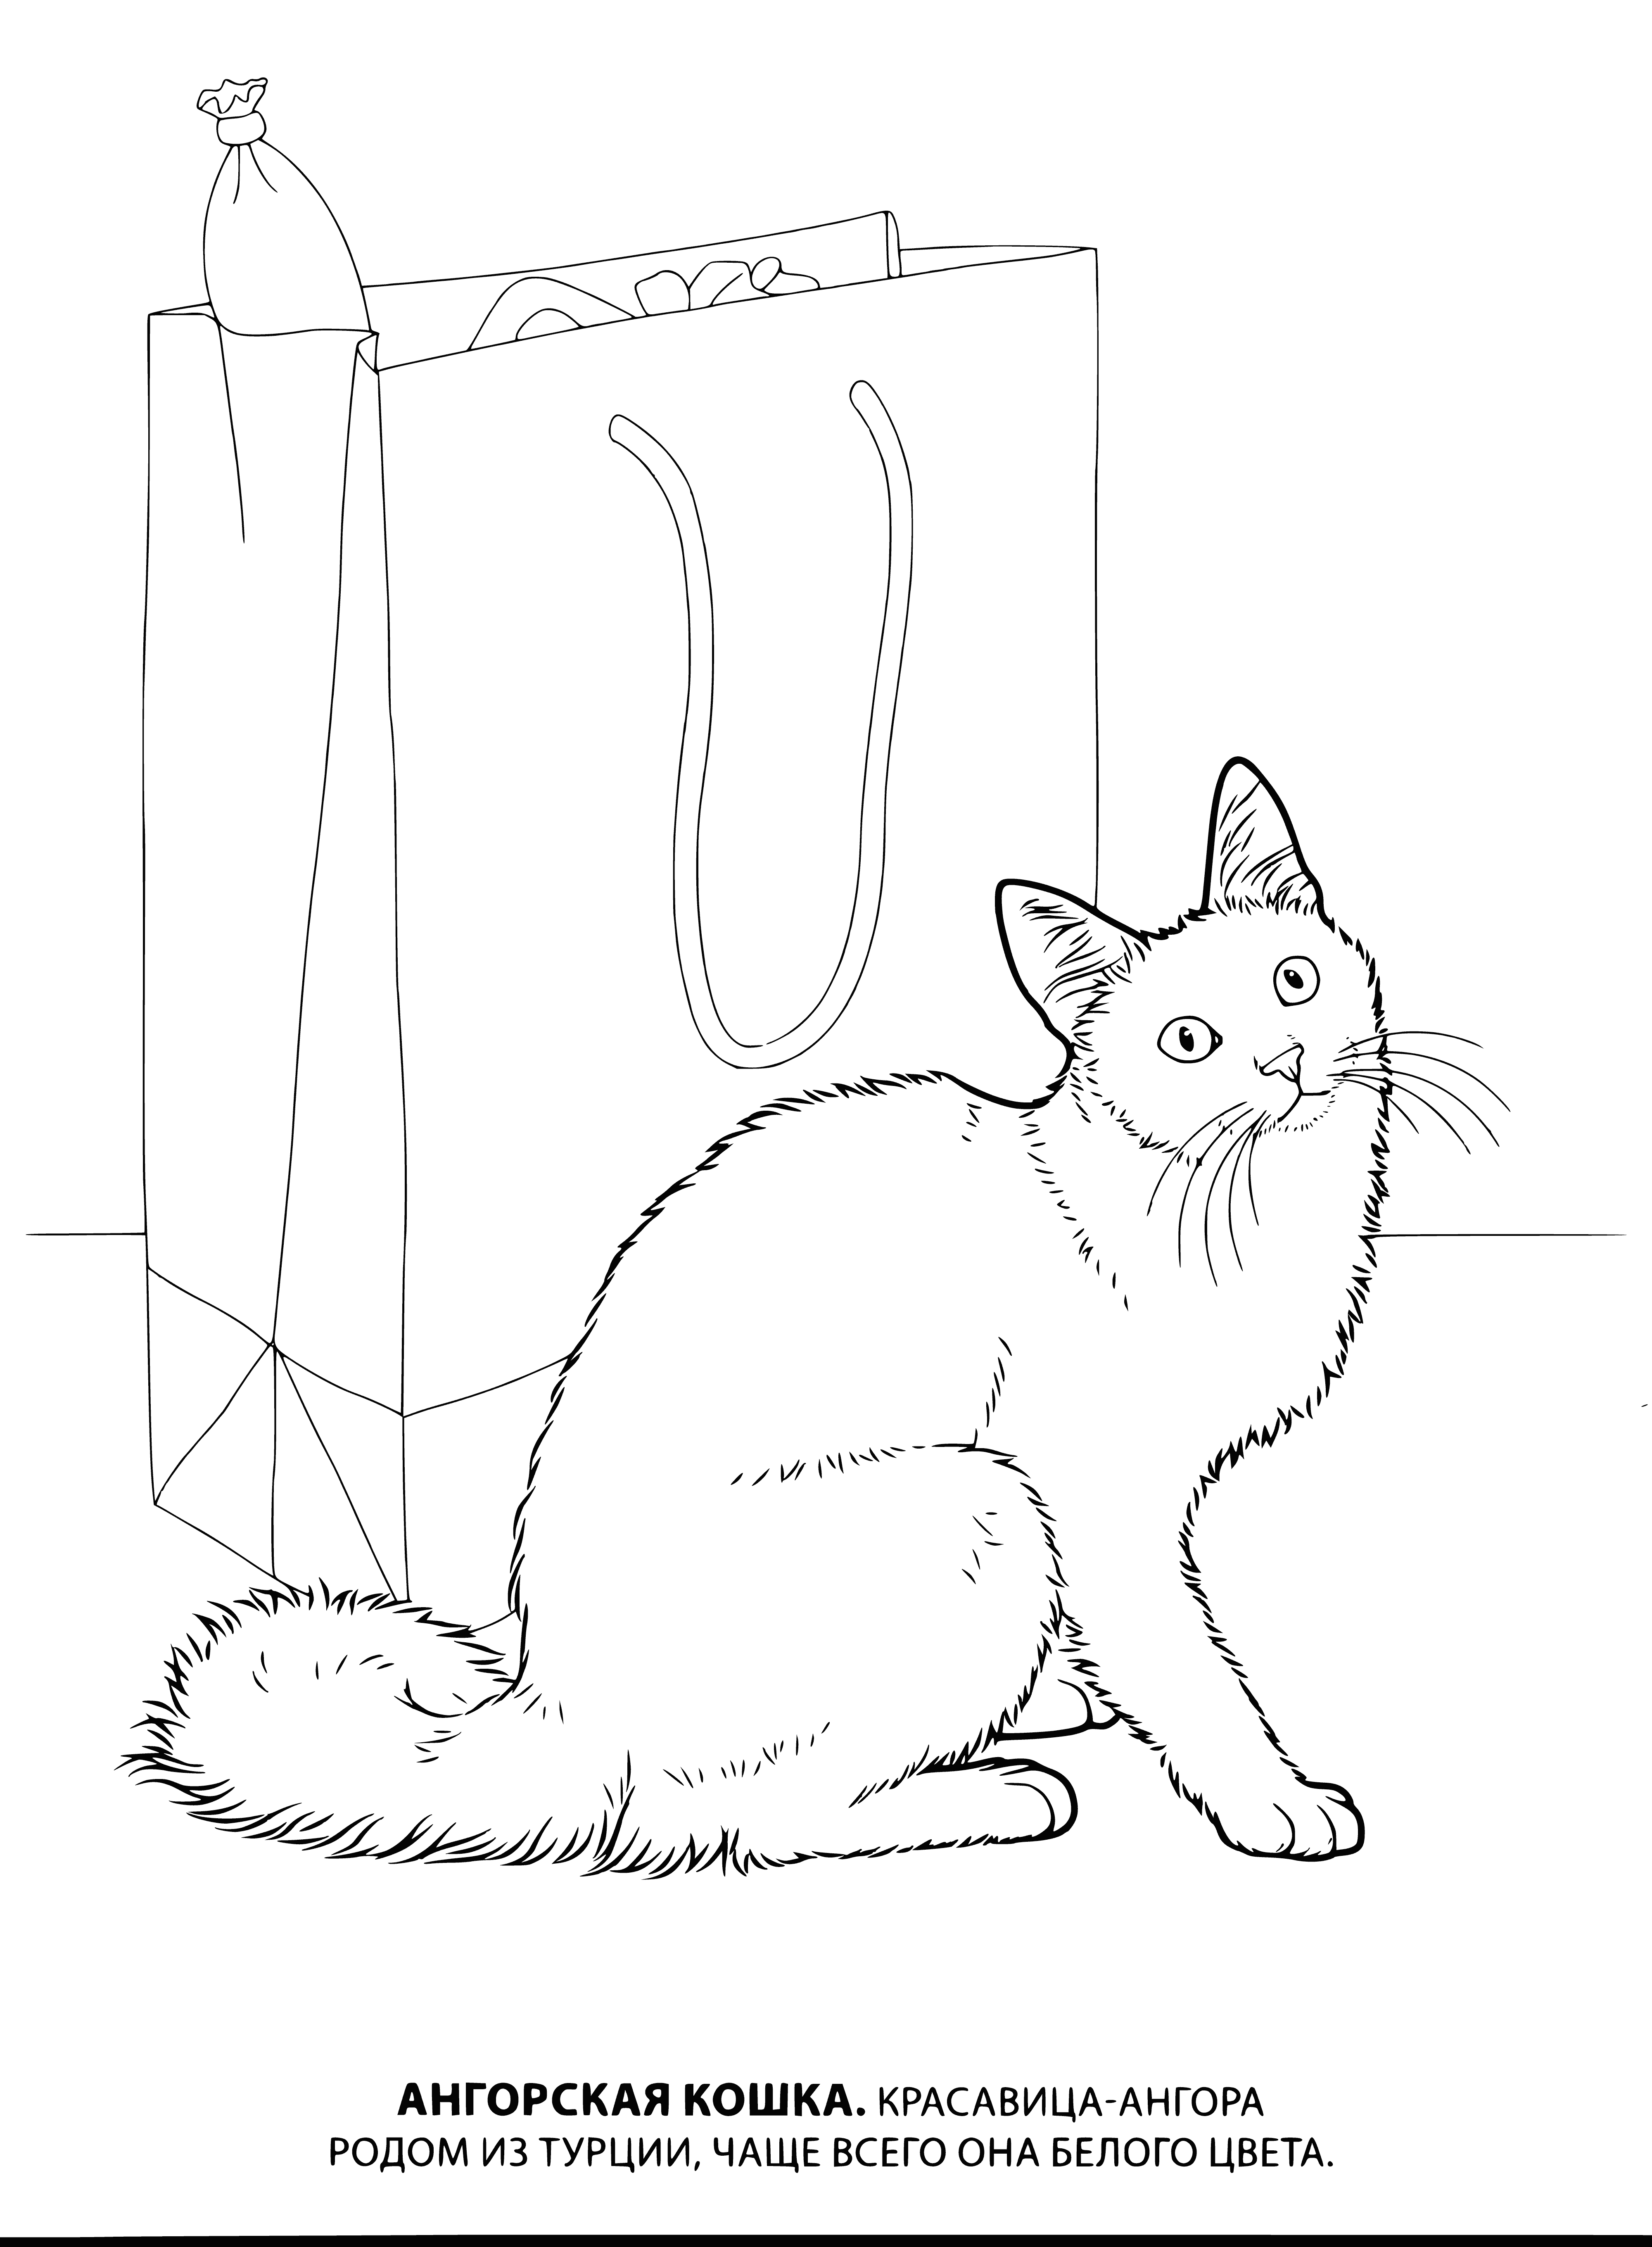 coloring page: => Angora cat: medium-sized, long, fluffy fur; pointed face, white fur w/black markings.